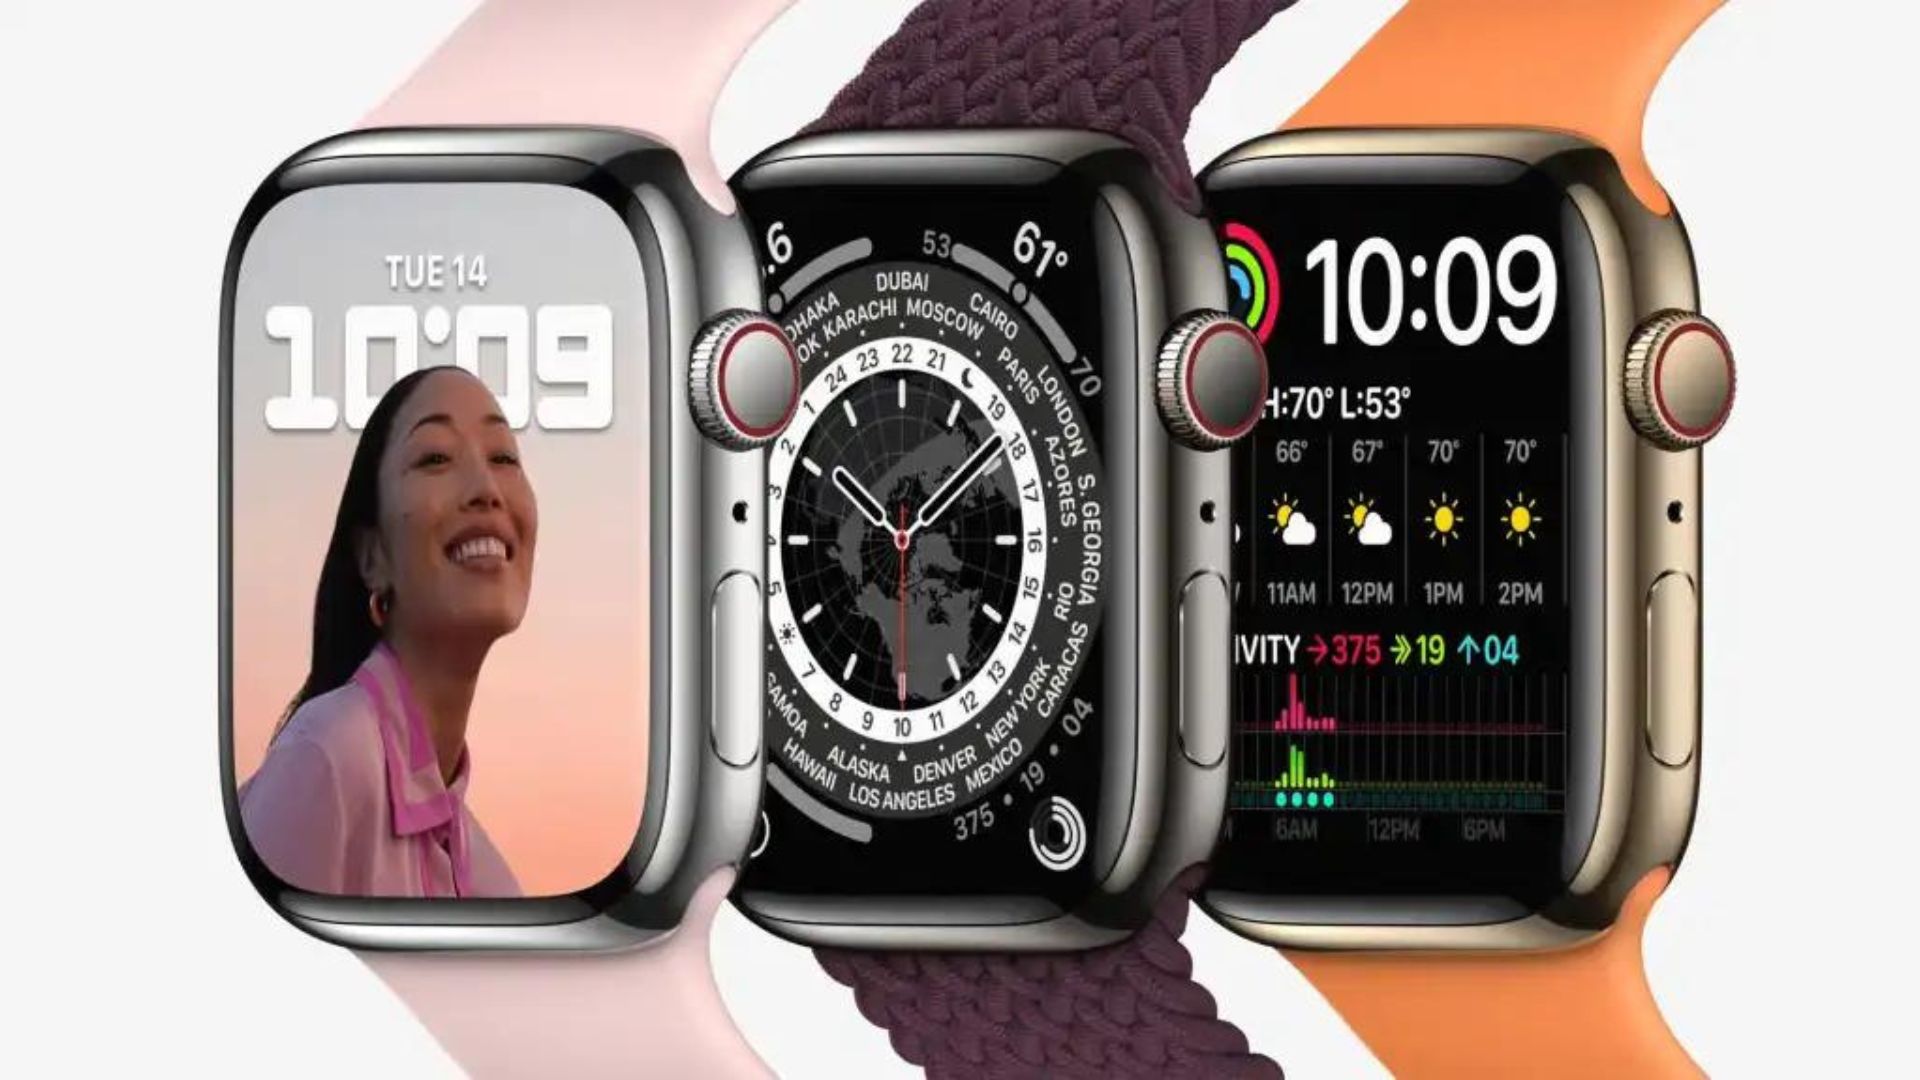 The Best Apple Watch Deals This Is The Lowest We’ve Seen For The Apple